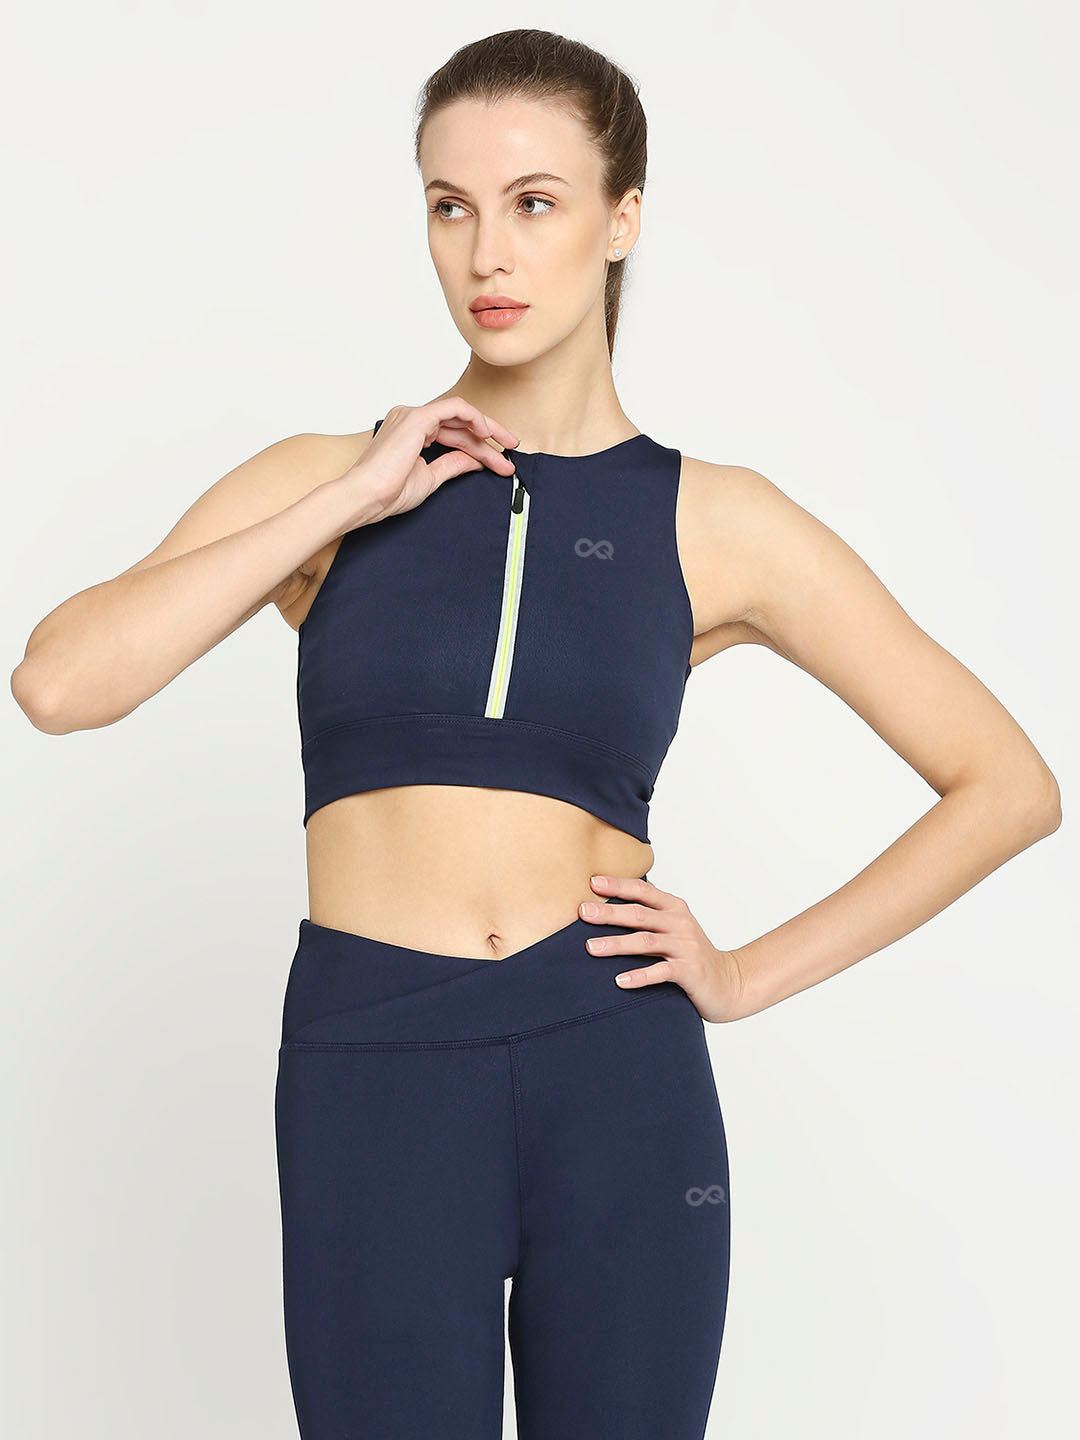 Women's Sports Bras Collection - Support and Style for Active Women